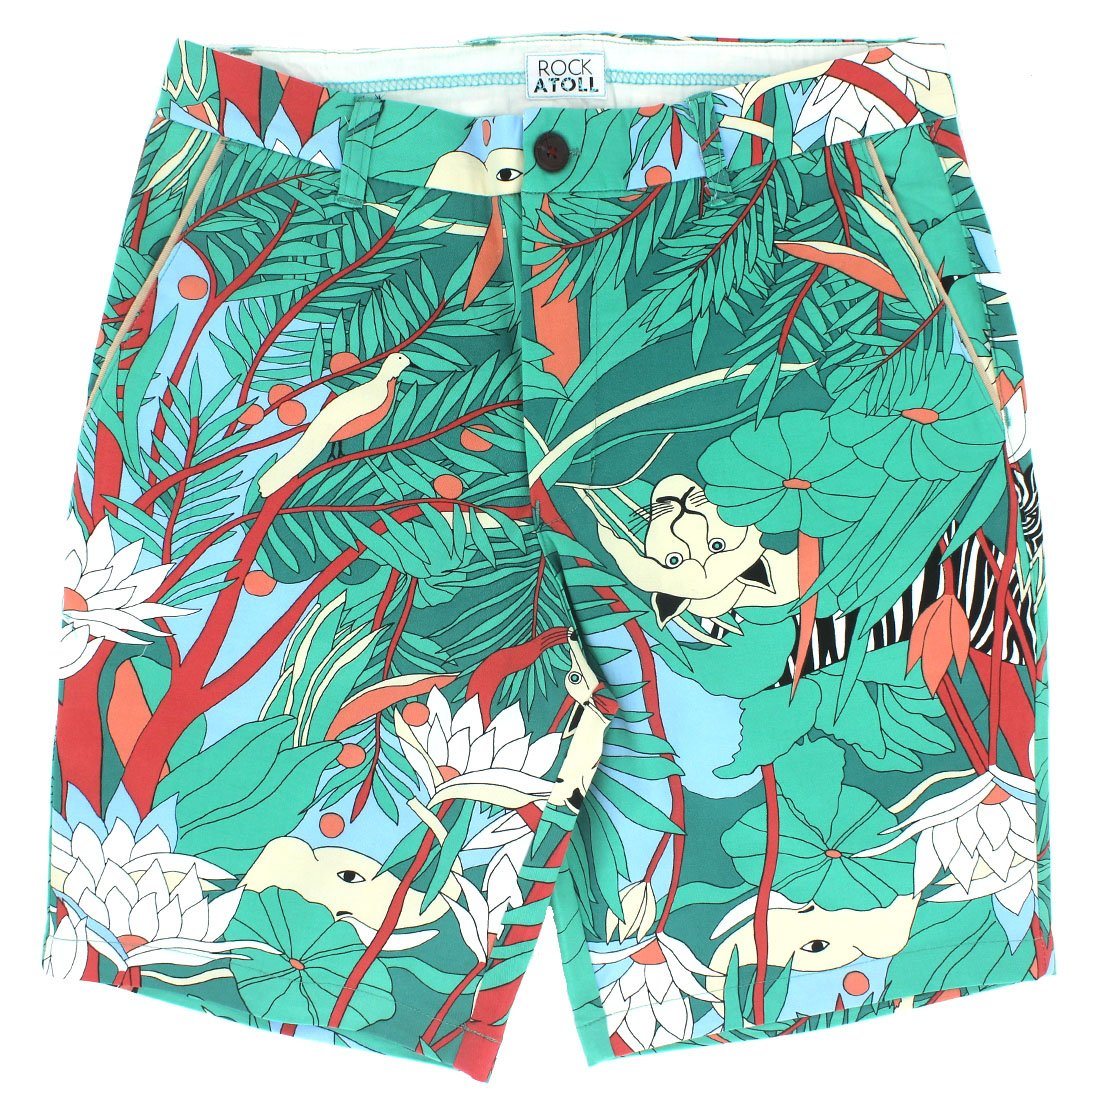 Floral Unusual Quirky Graphic Print Shorts for Men in Green